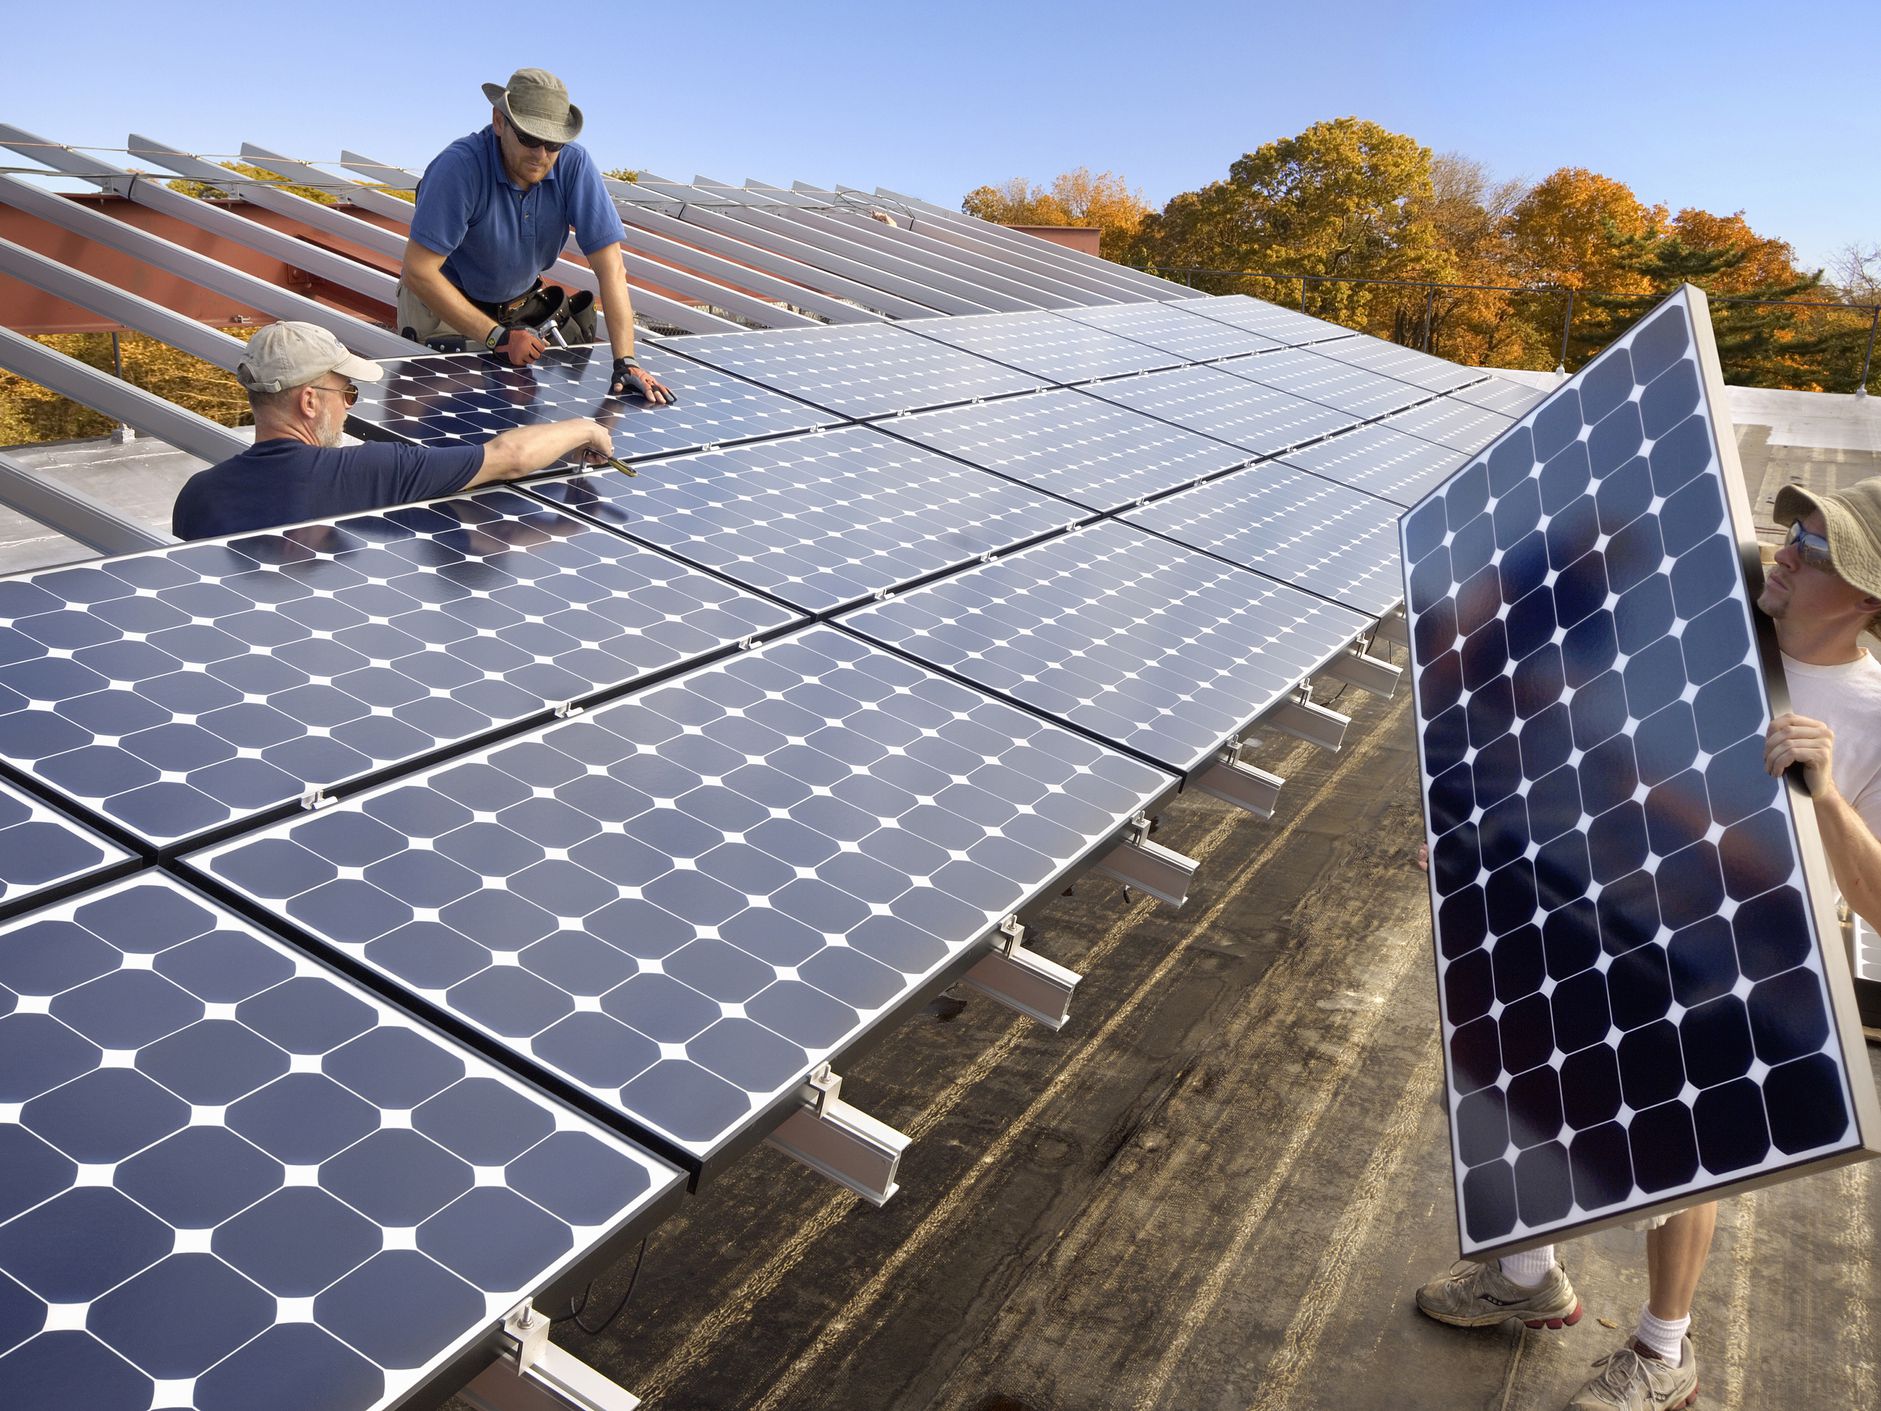 Why are solar energy systems becoming so popular?